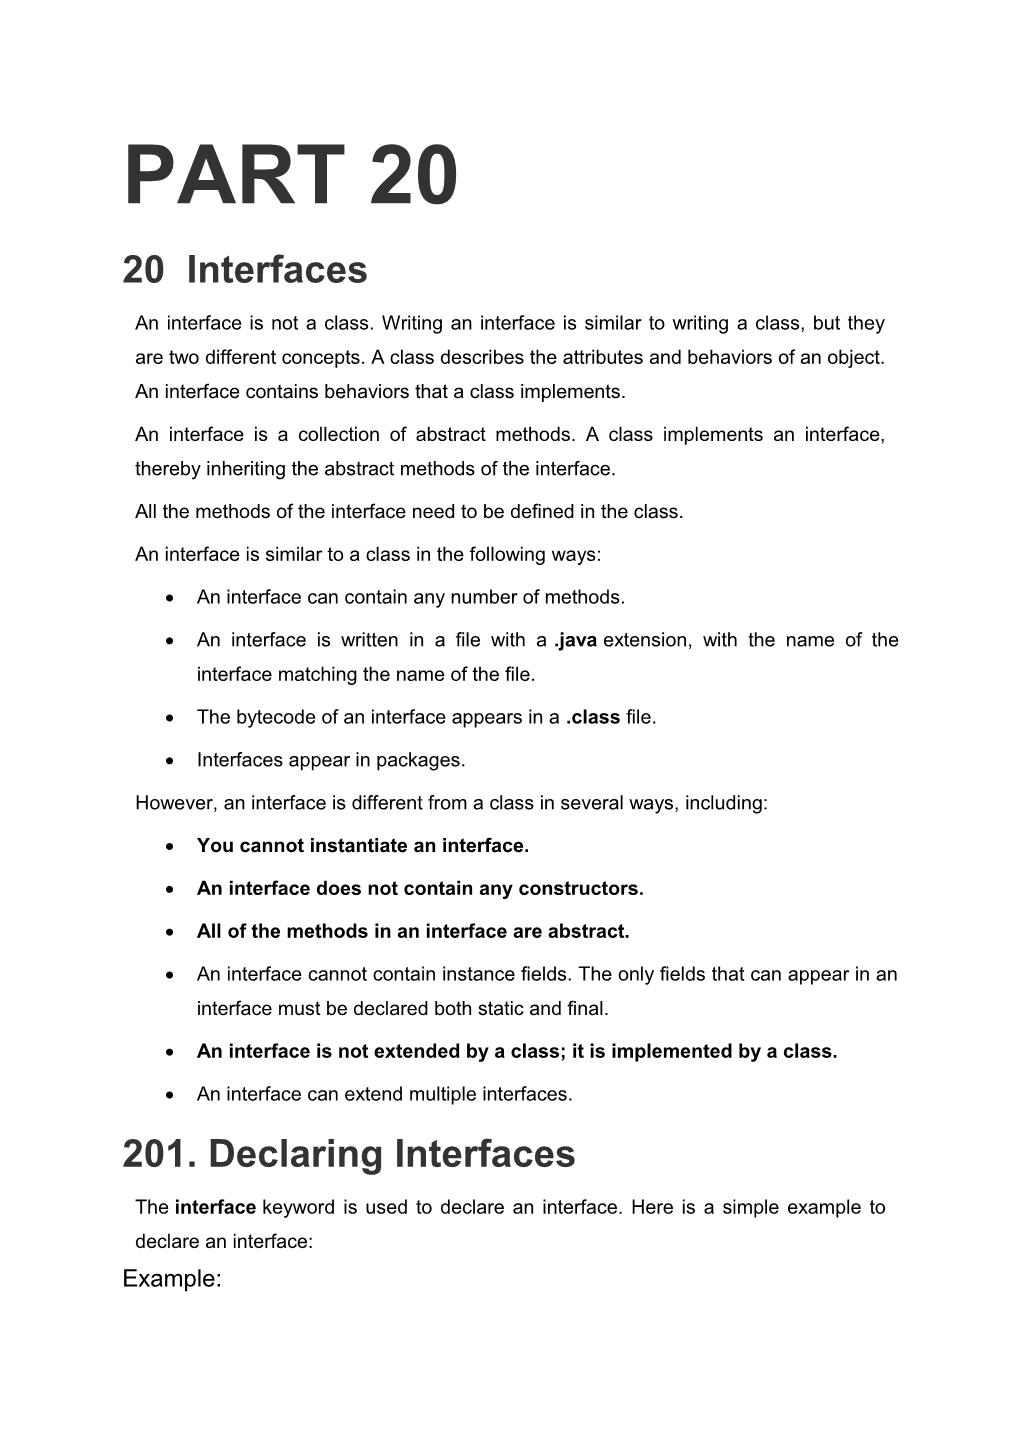 All the Methods of the Interface Need to Be Defined in the Class